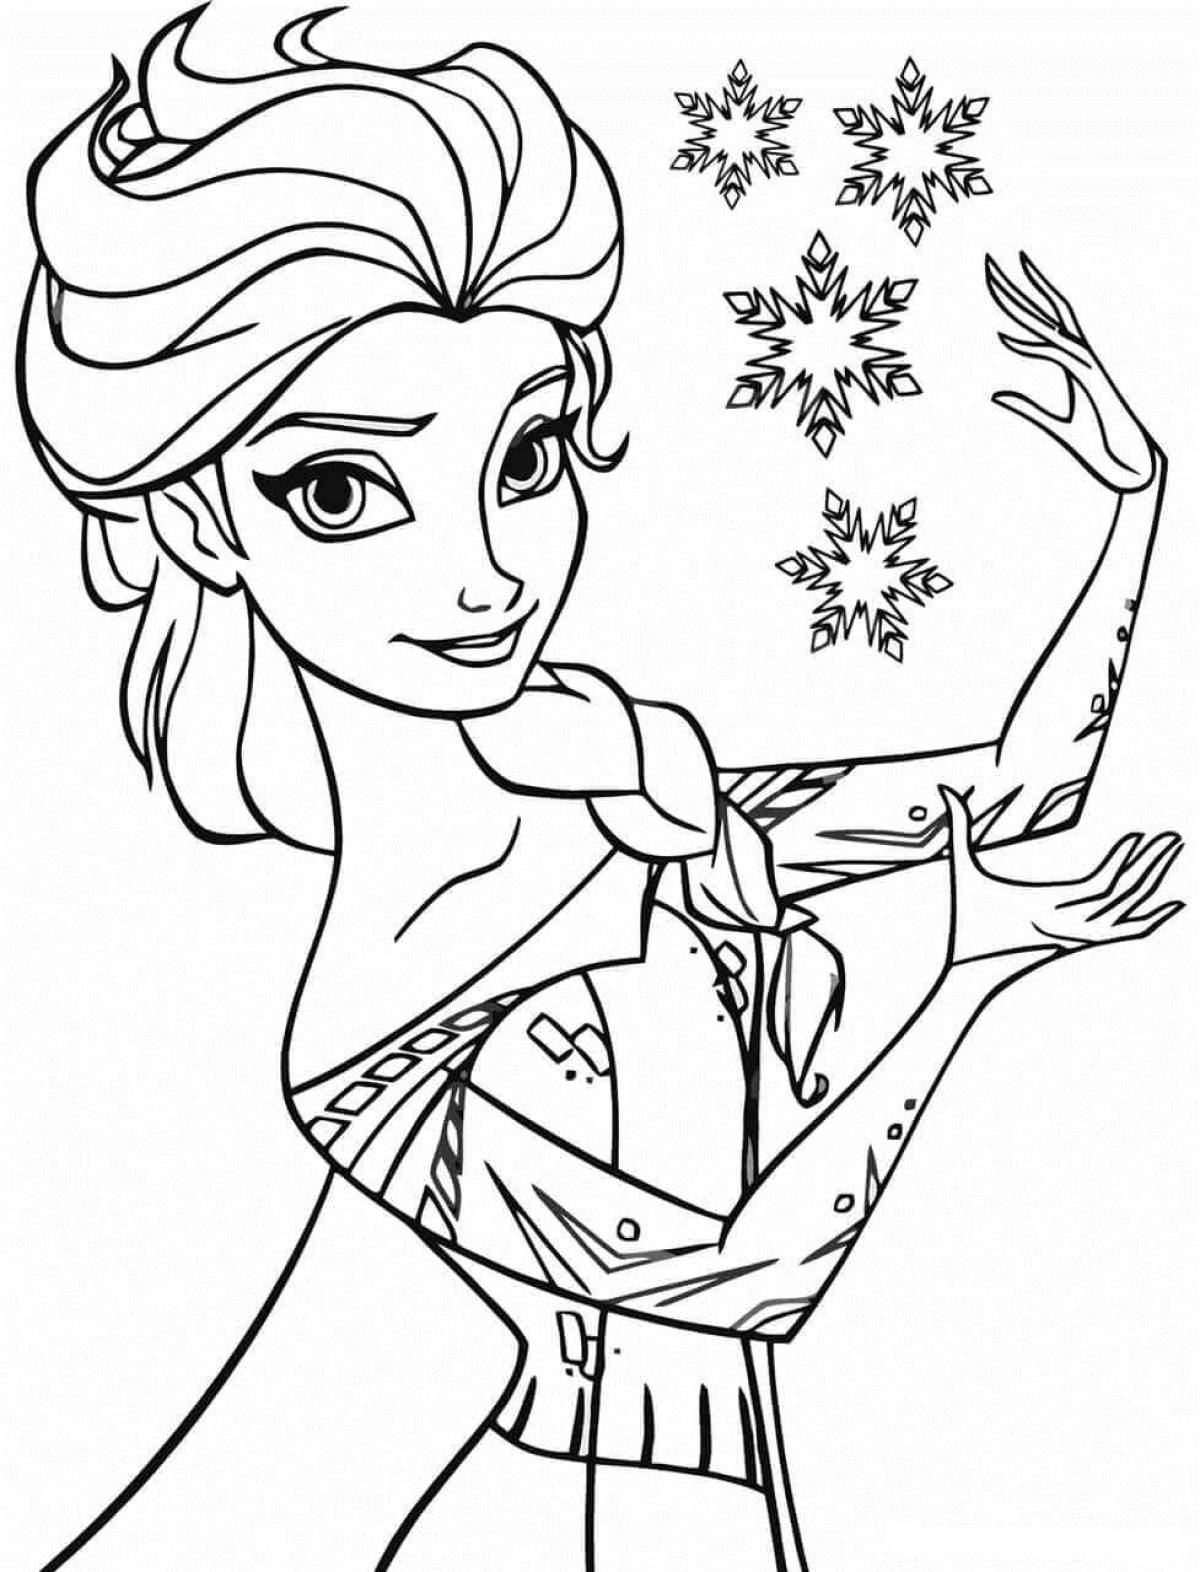 Colourful elsa coloring book for kids